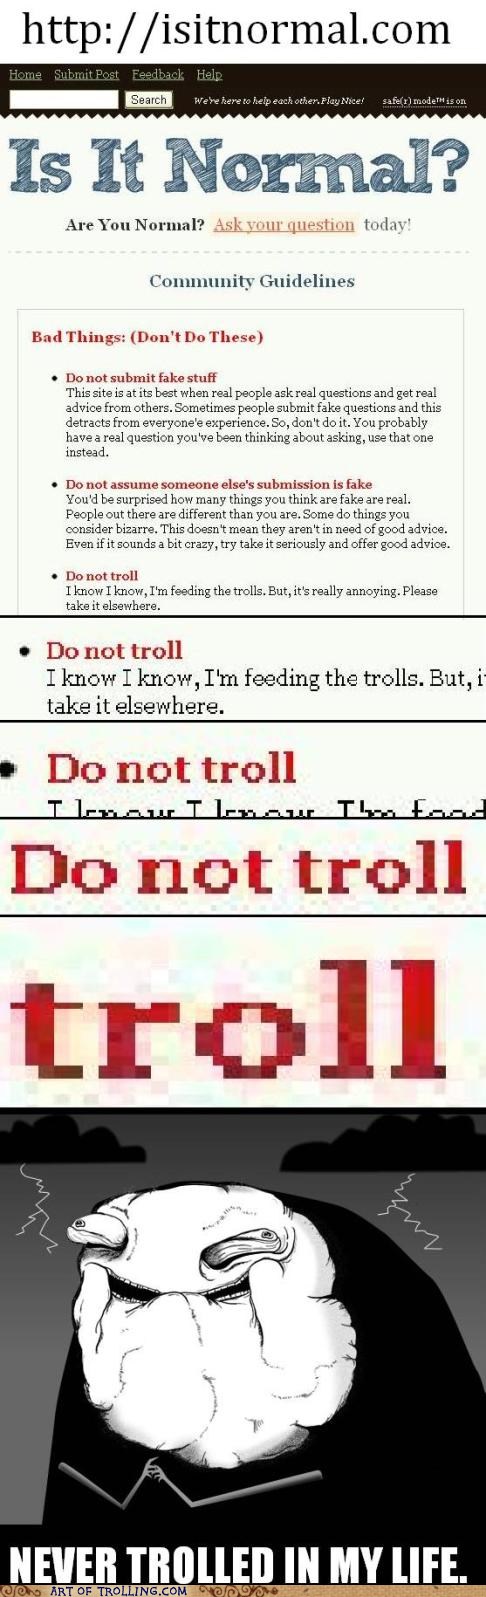 That Word, I Don't Think It Means What You Think It Means - Art of Trolling  - Troll, Trolling, Yahoo Answers